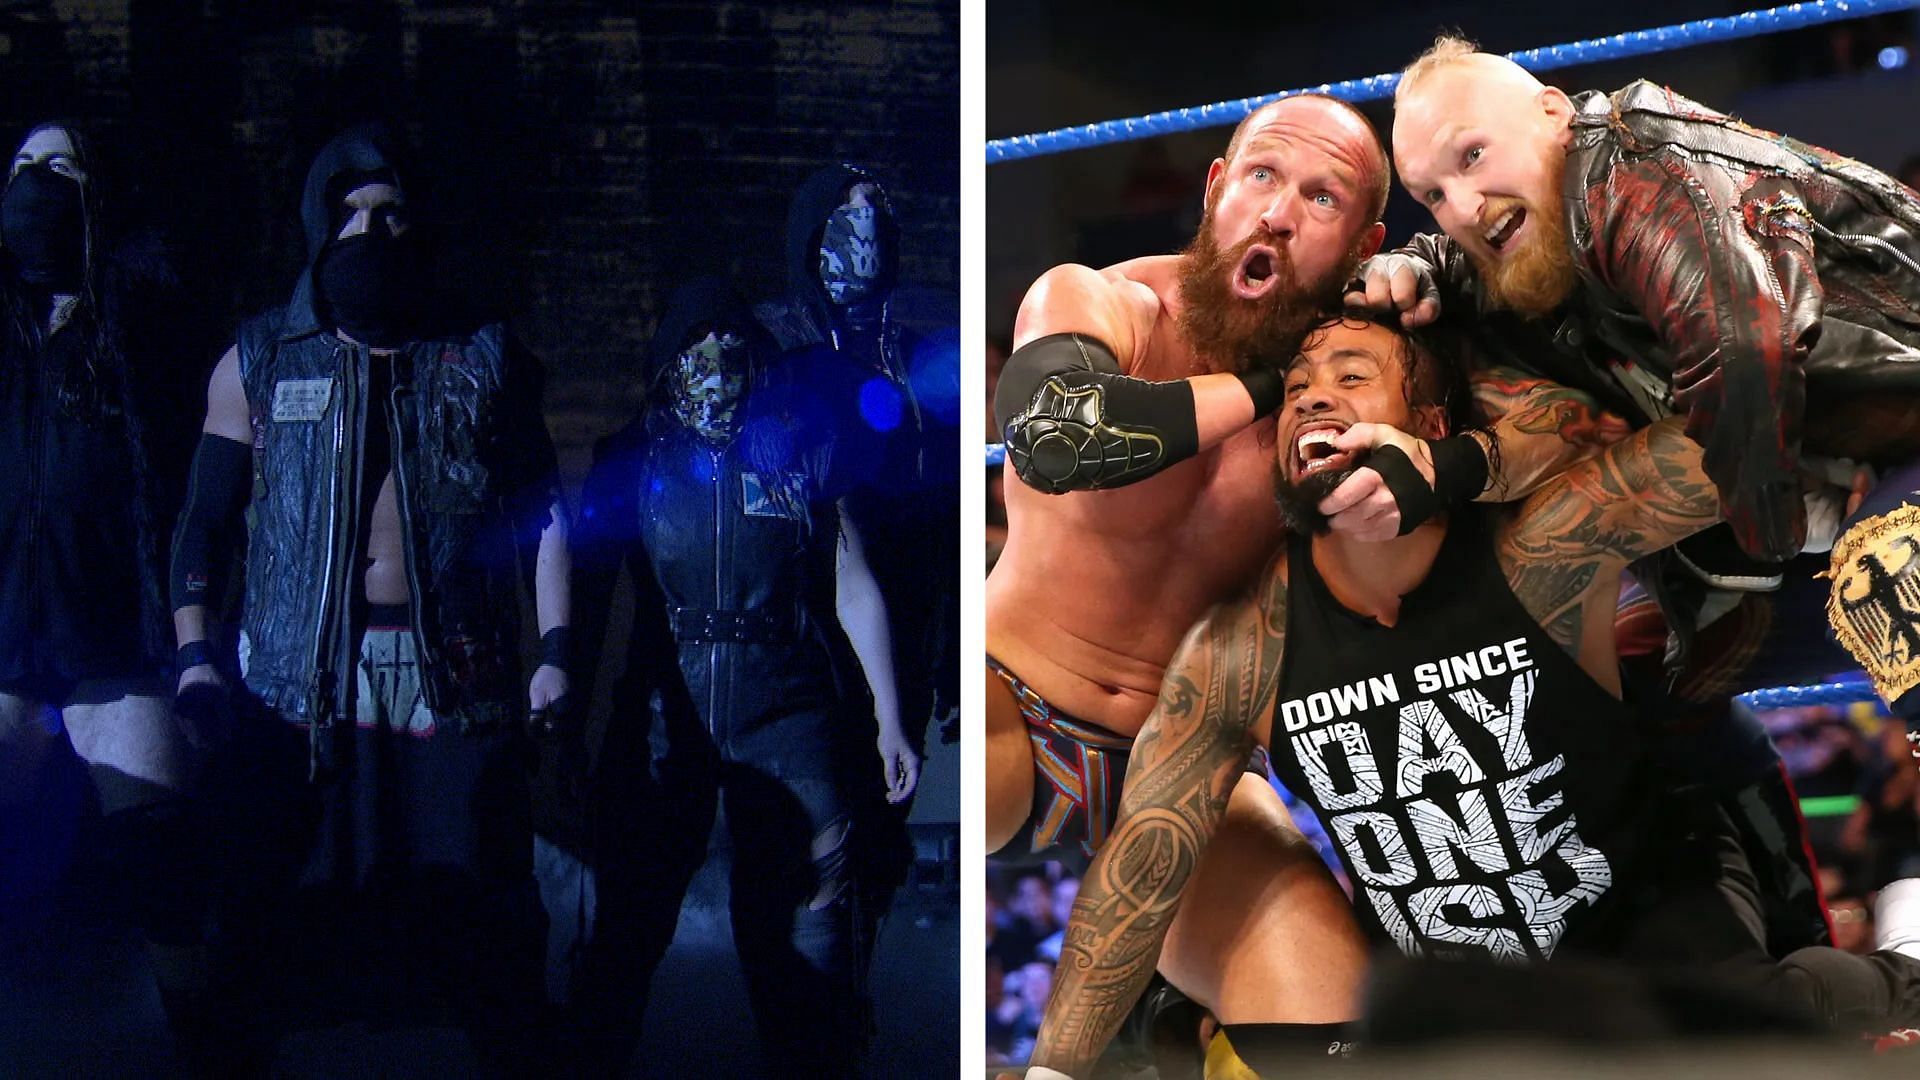 Sanity could potentially return to WWE